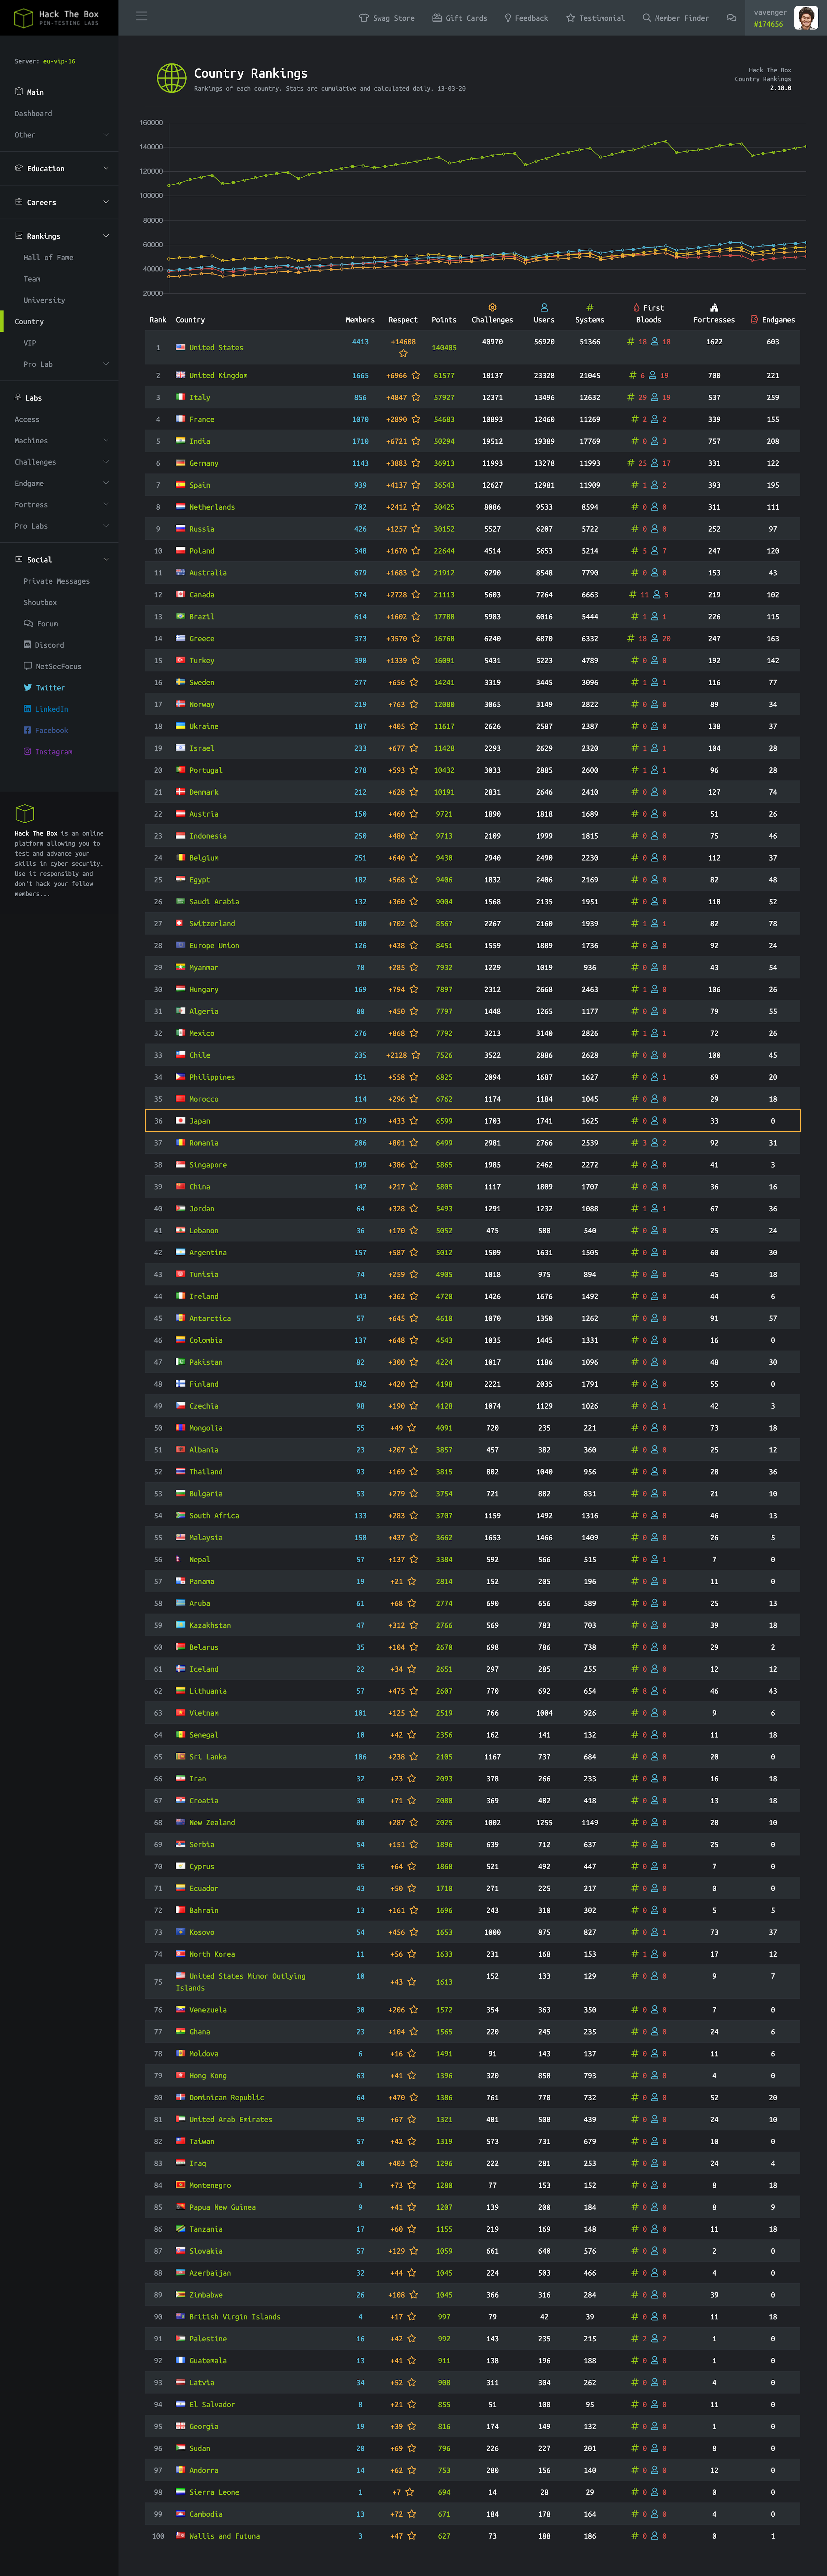 screencapture-hackthebox-eu-home-country-rankings-2020-03-13-16_54_14.png